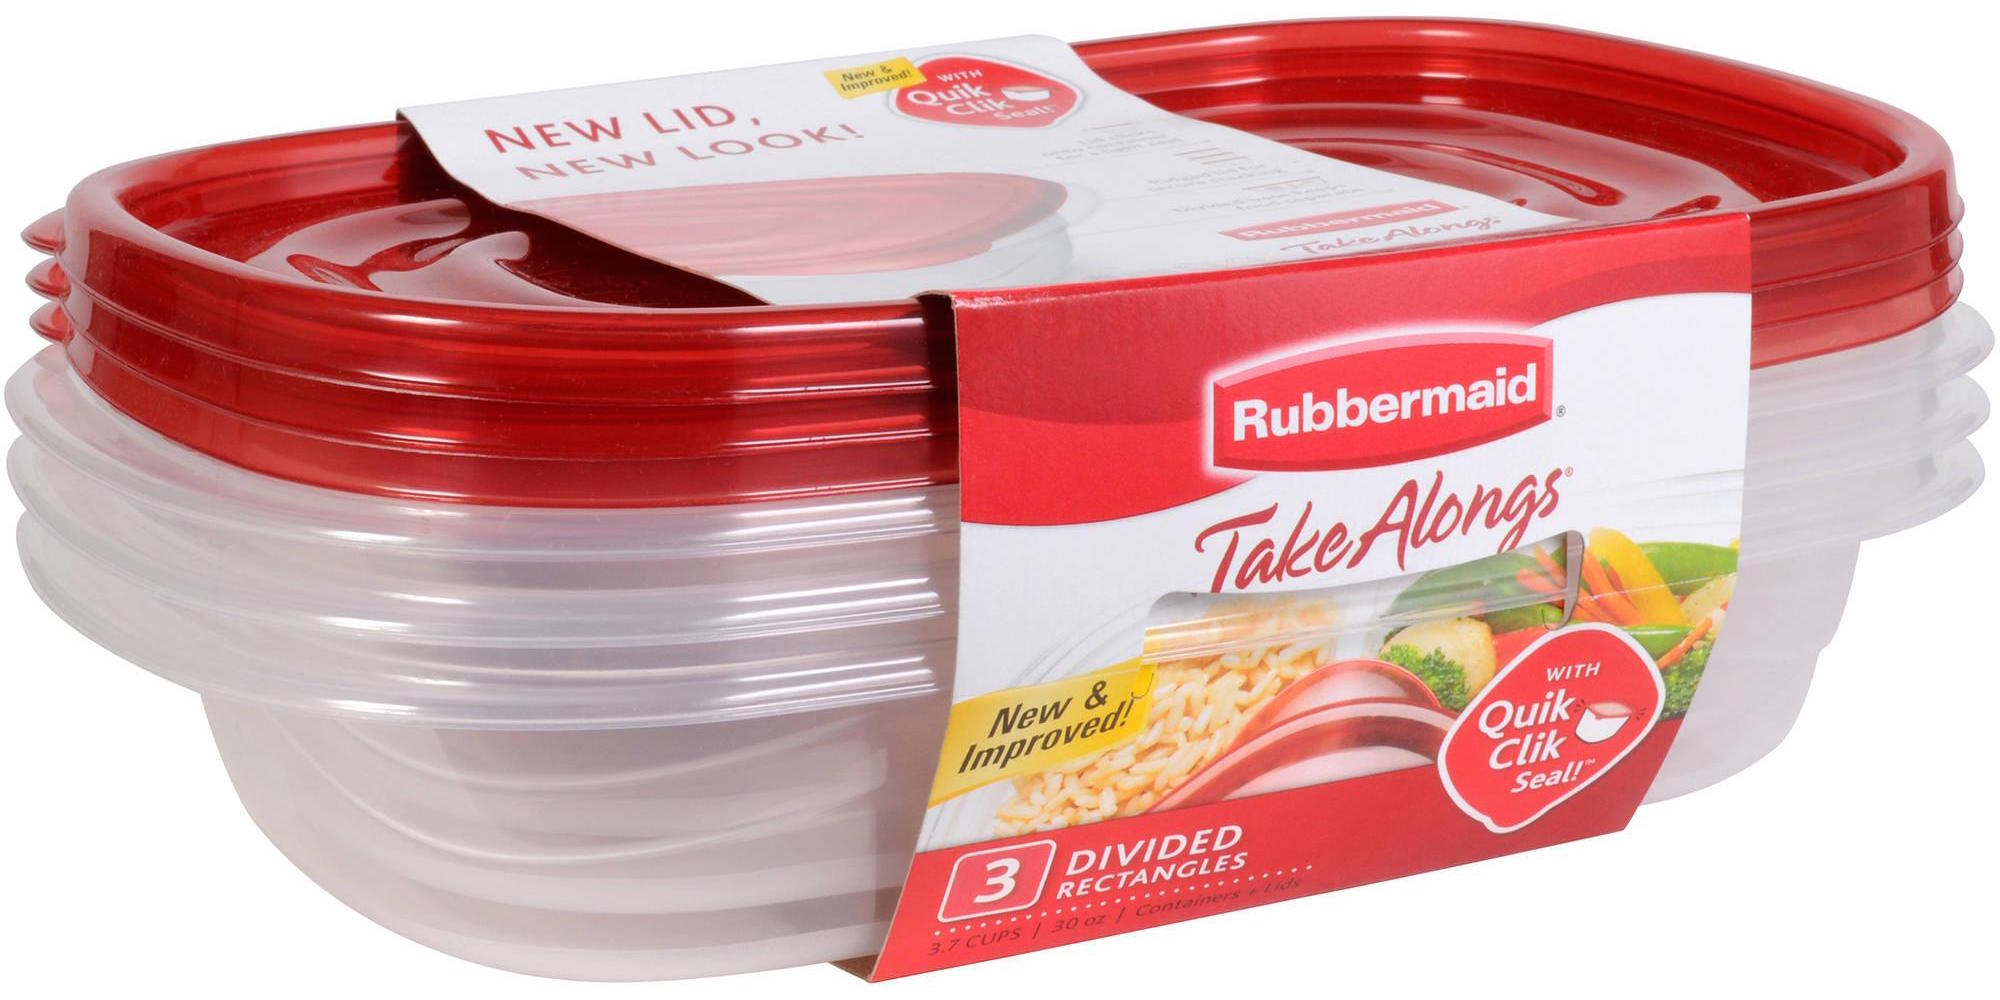 Rubbermaid Takealongs Divided Rectangle Container Review 